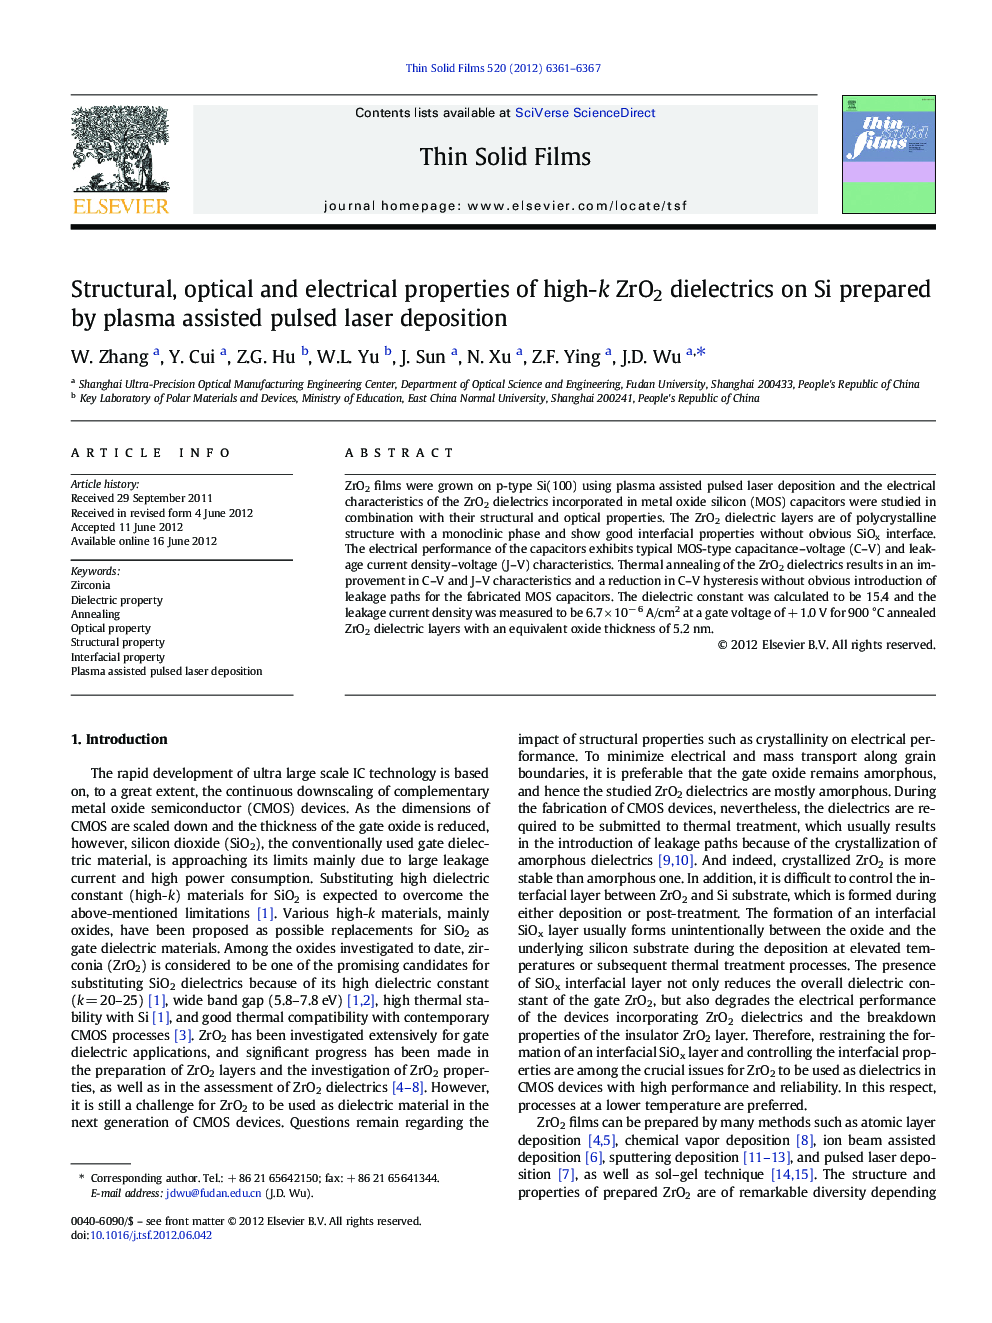 Structural, optical and electrical properties of high-k ZrO2 dielectrics on Si prepared by plasma assisted pulsed laser deposition